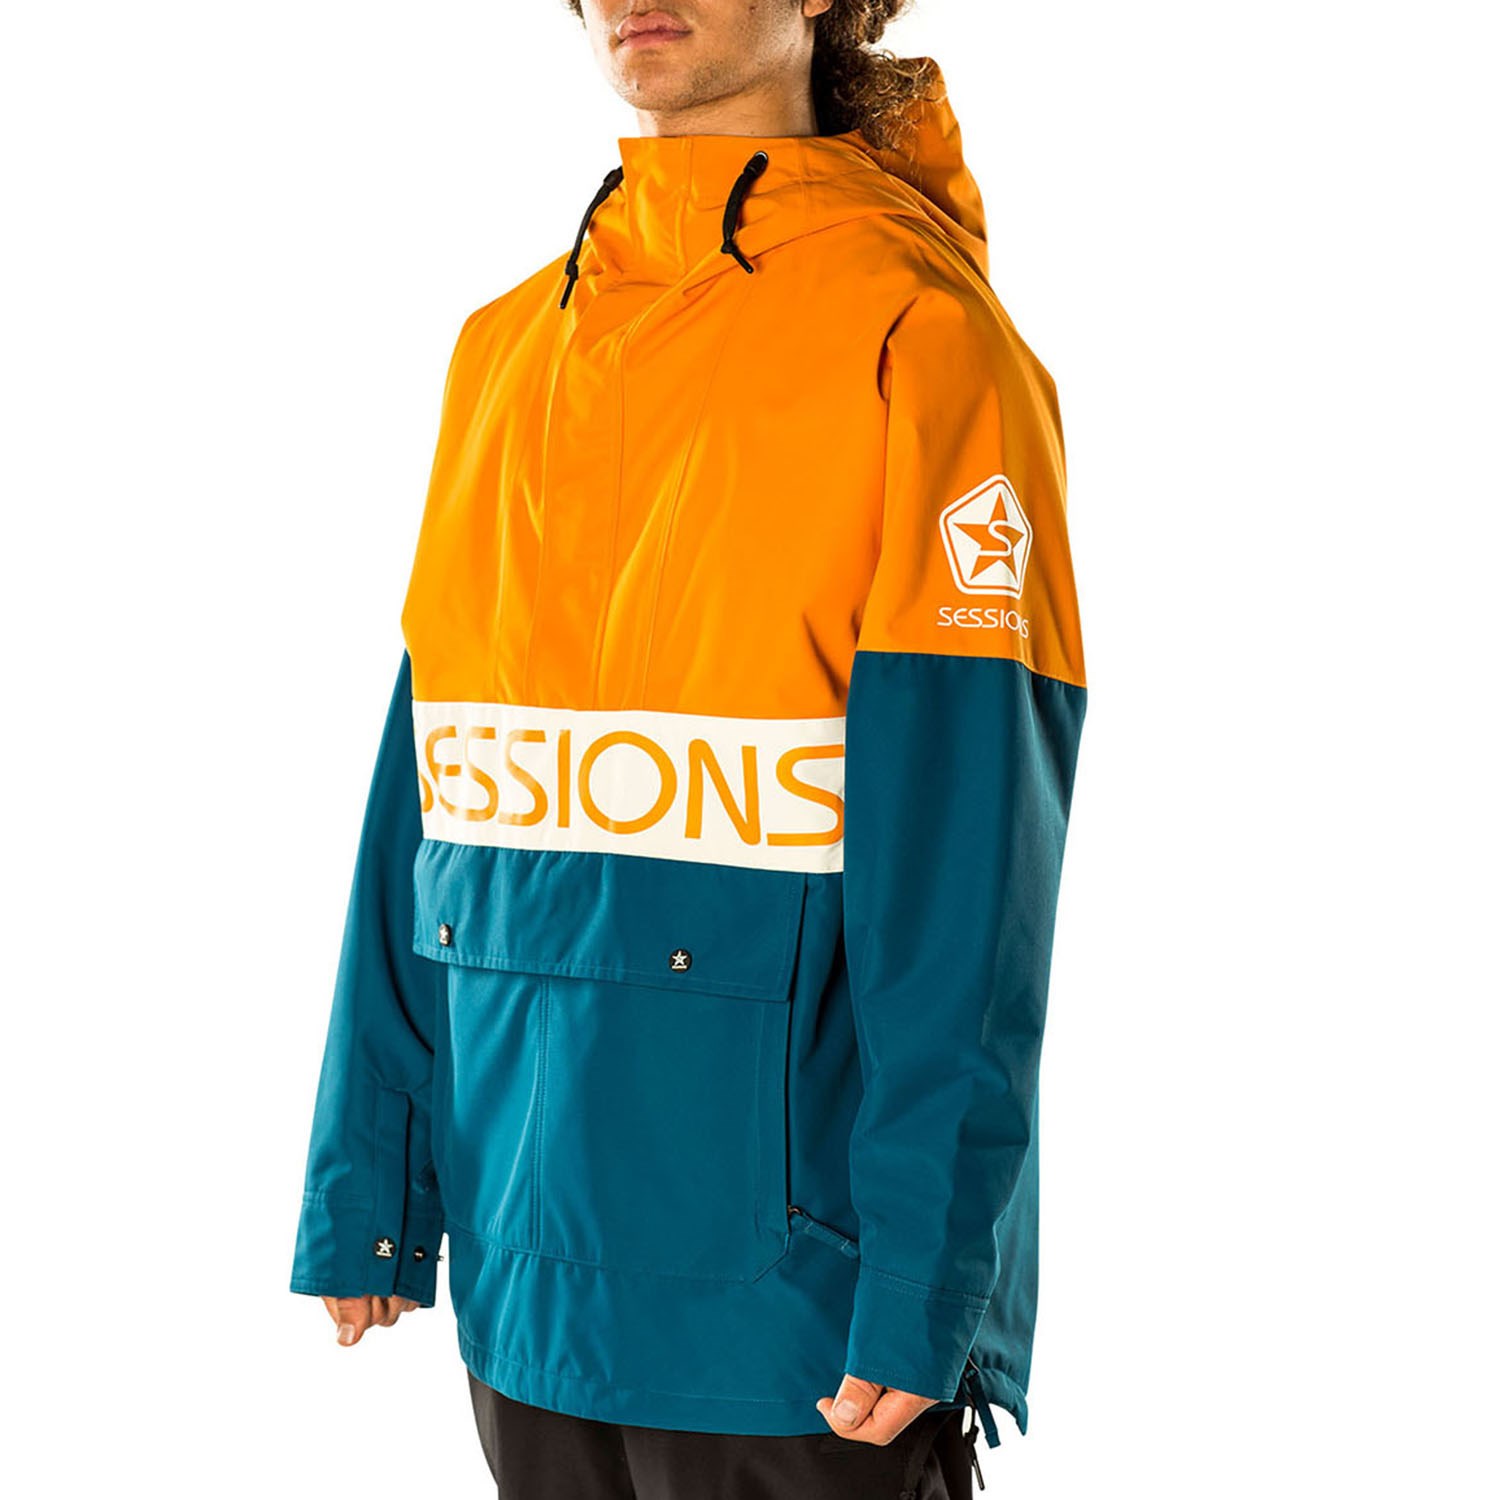 Sessions Chaos Pullover Snowboard Jacket Mens 